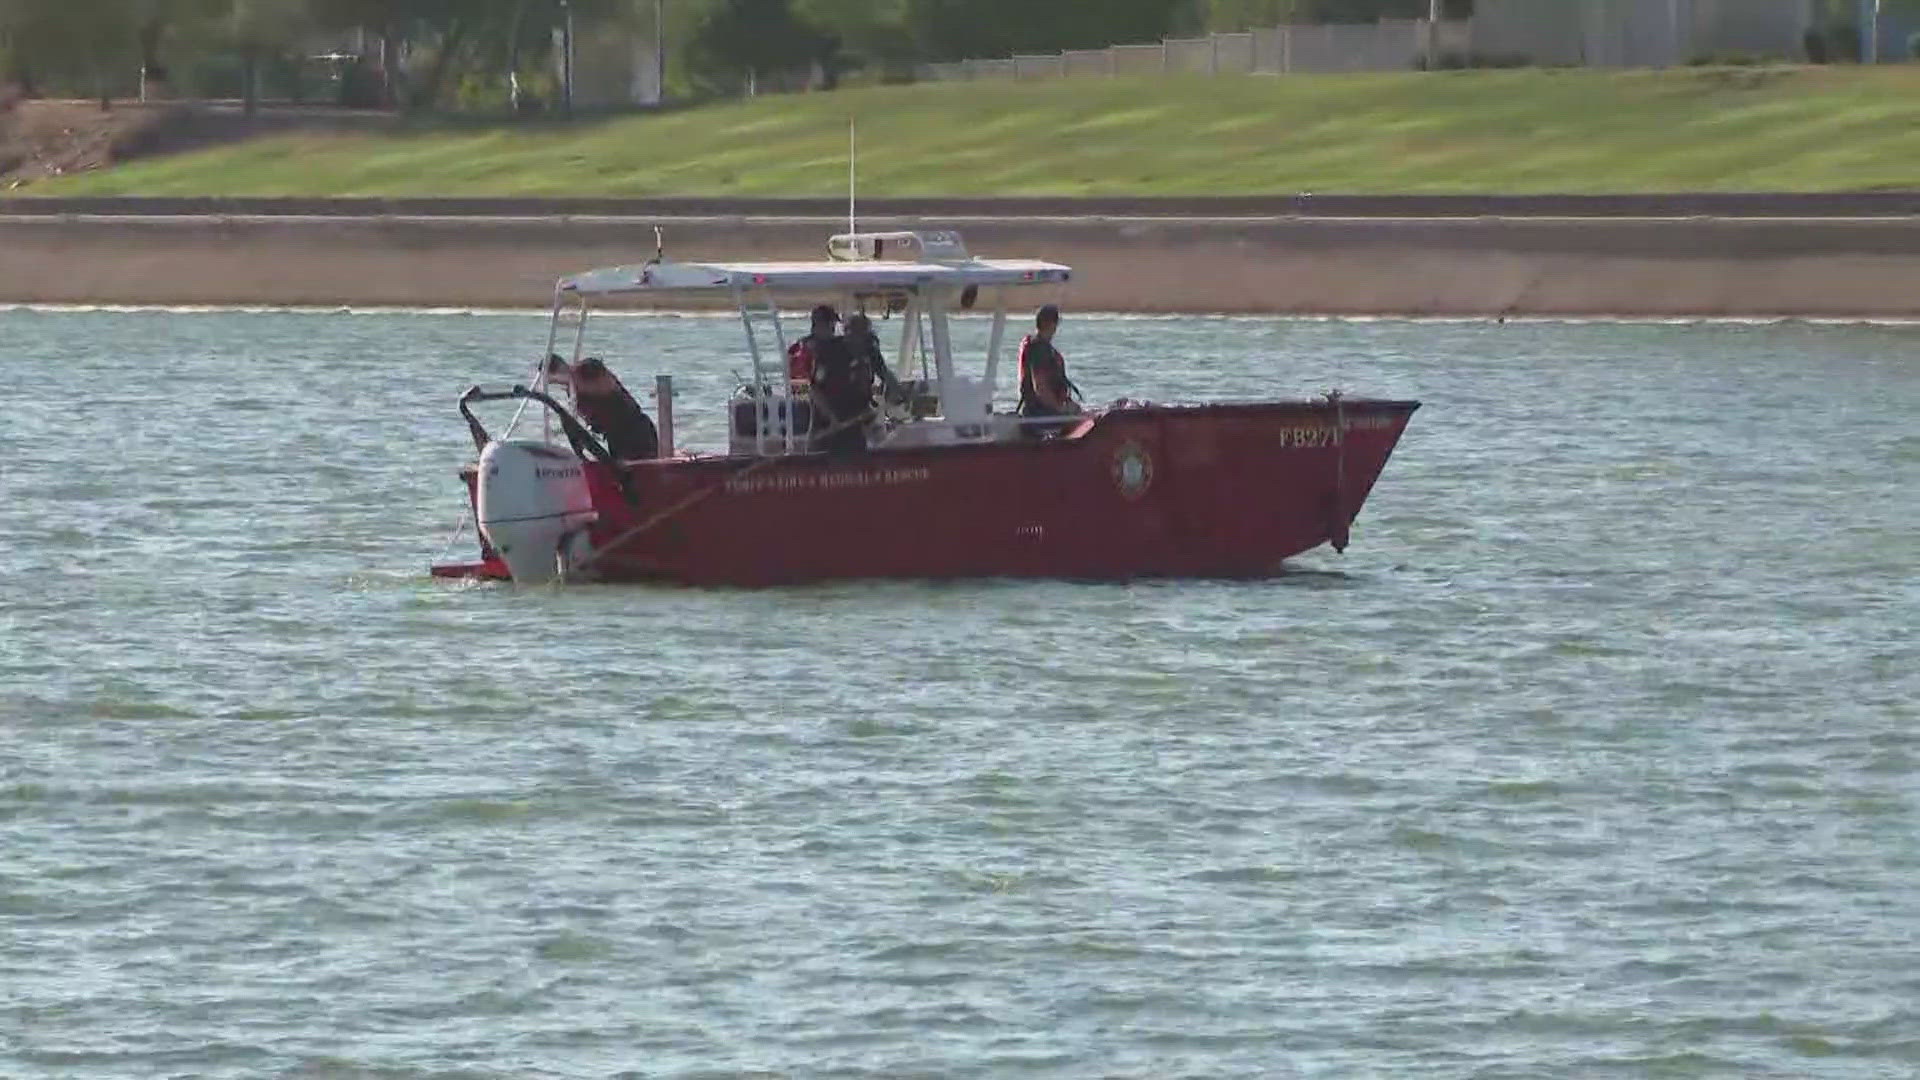 The Tempe Fire Medical Rescue Department Dive Team recovered a body during a "recovery operation" Tuesday morning.